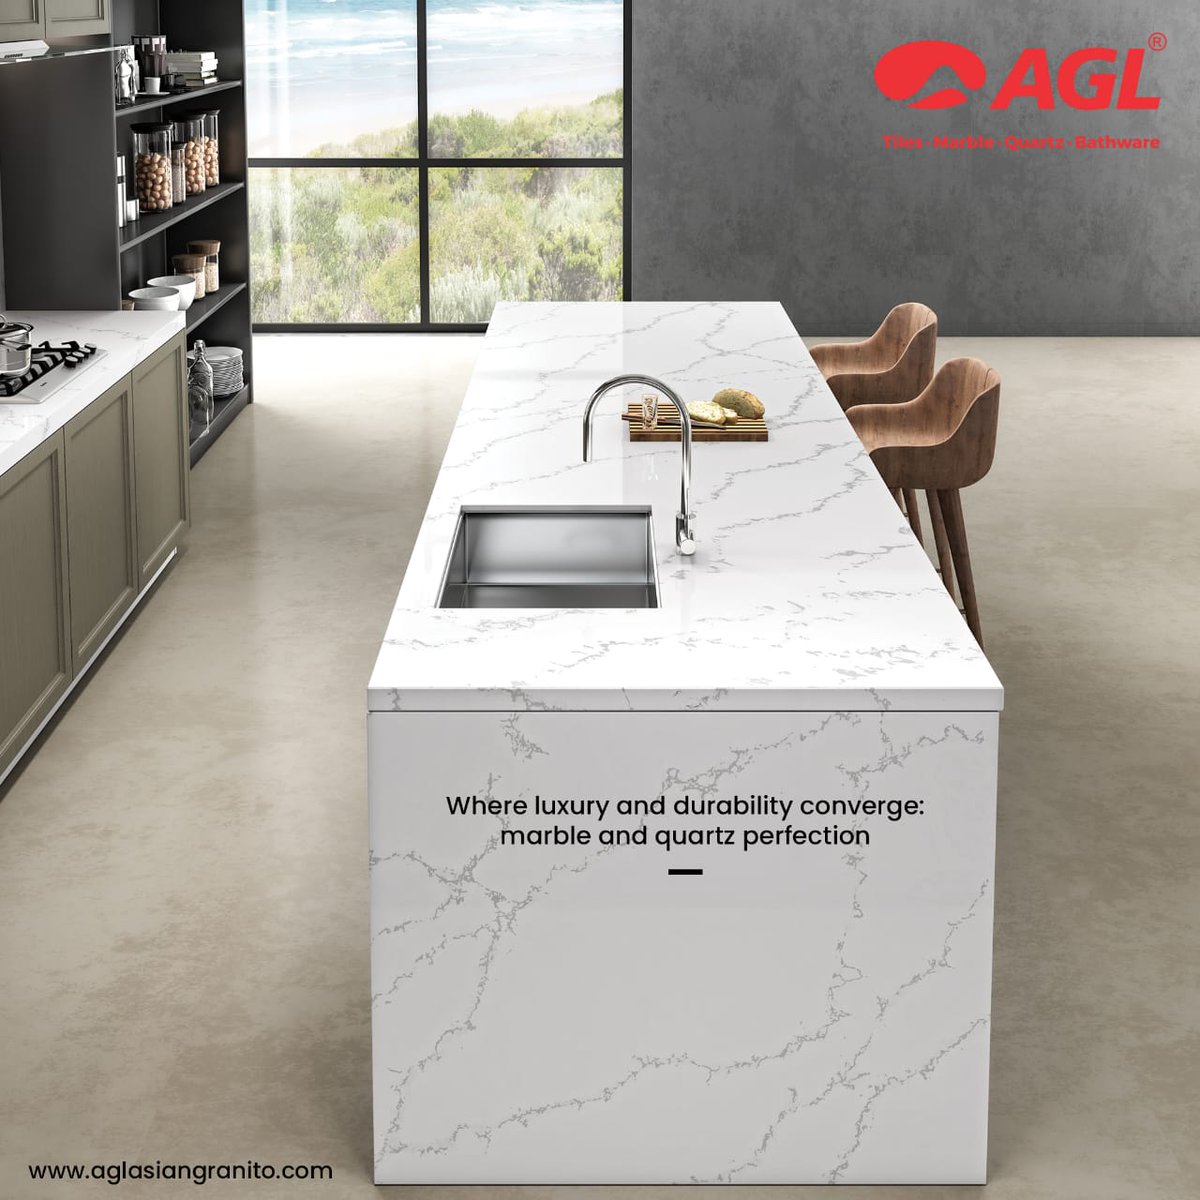 Where luxury and durability converge : marble and quartz perfection...

Stay tuned for more updates..

#architecturereconnectsummit #ars #gbrc #globalbusinessreconnect #b2bconference #wowawards #exhibition #networking #architecturesummit #architectureconference #AGL-marble&quartz